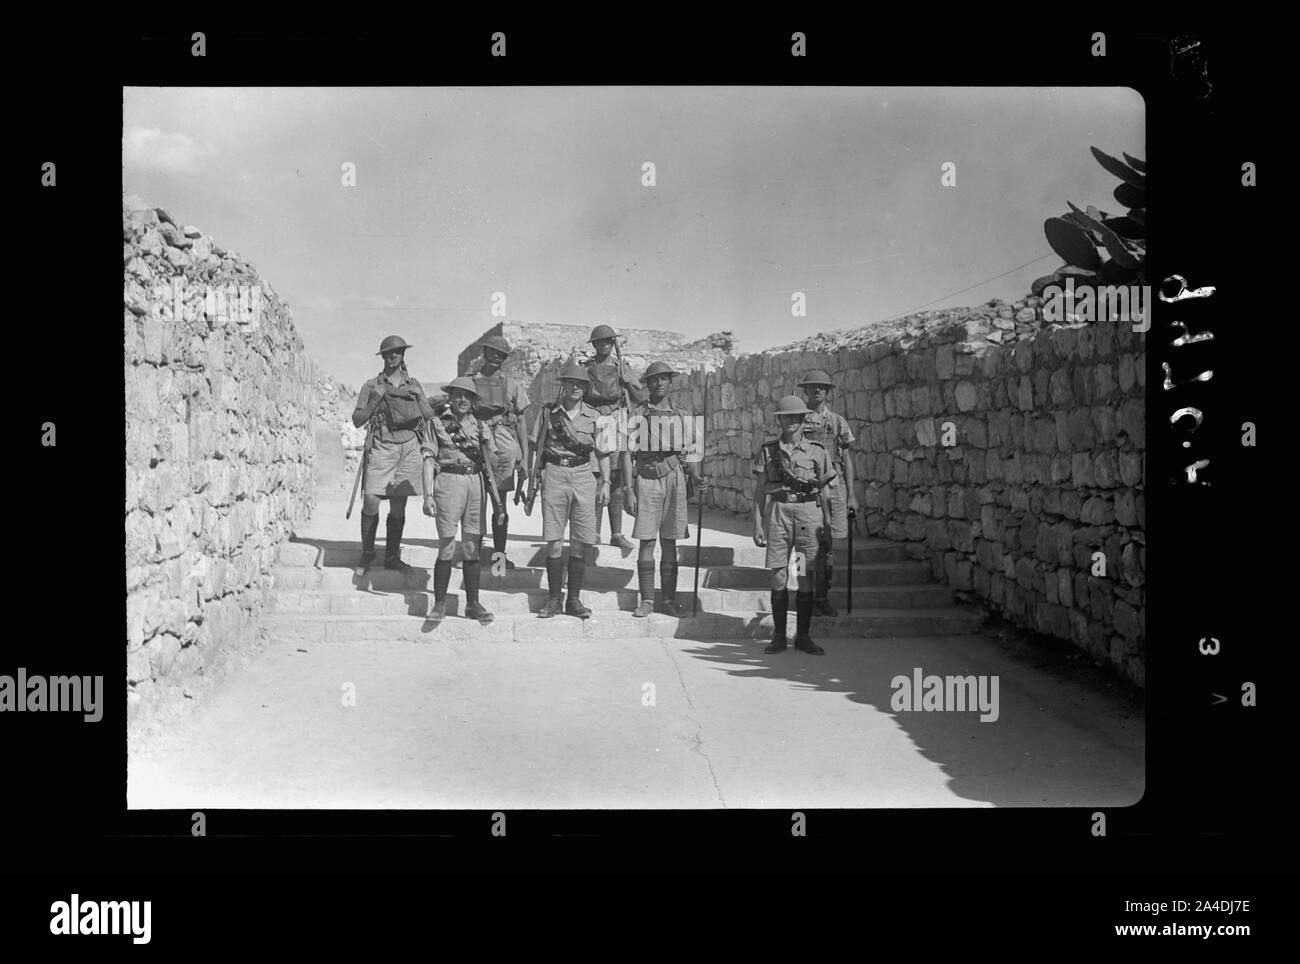 The raising of the siege of Jerusalem. Typical scene of troops in Old City before the lifting of curfew, troops descending the stairs Stock Photo